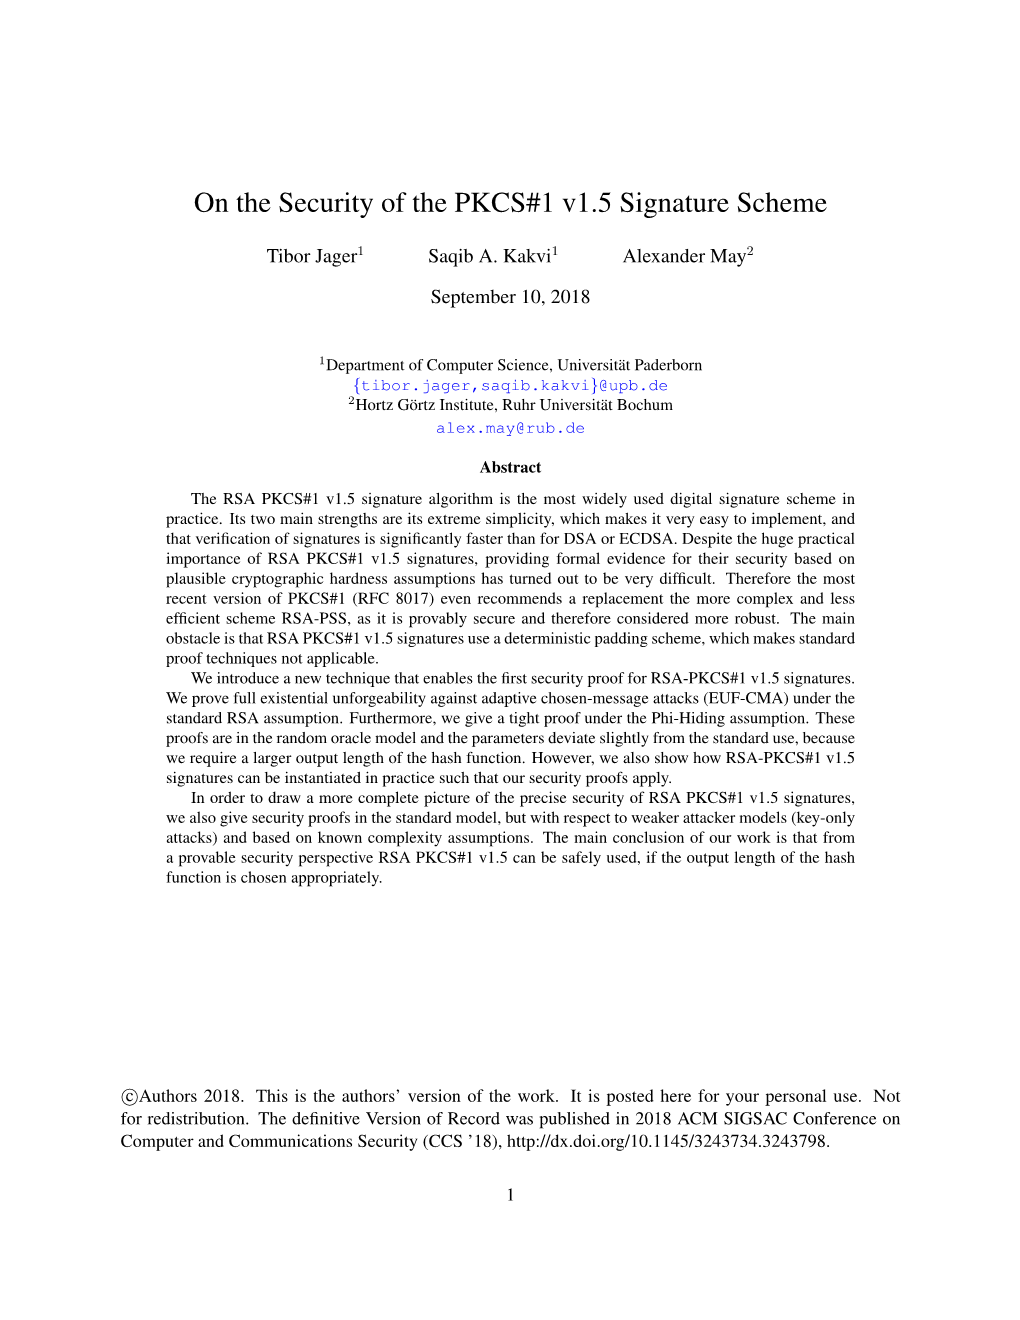 On the Security of the PKCS#1 V1.5 Signature Scheme